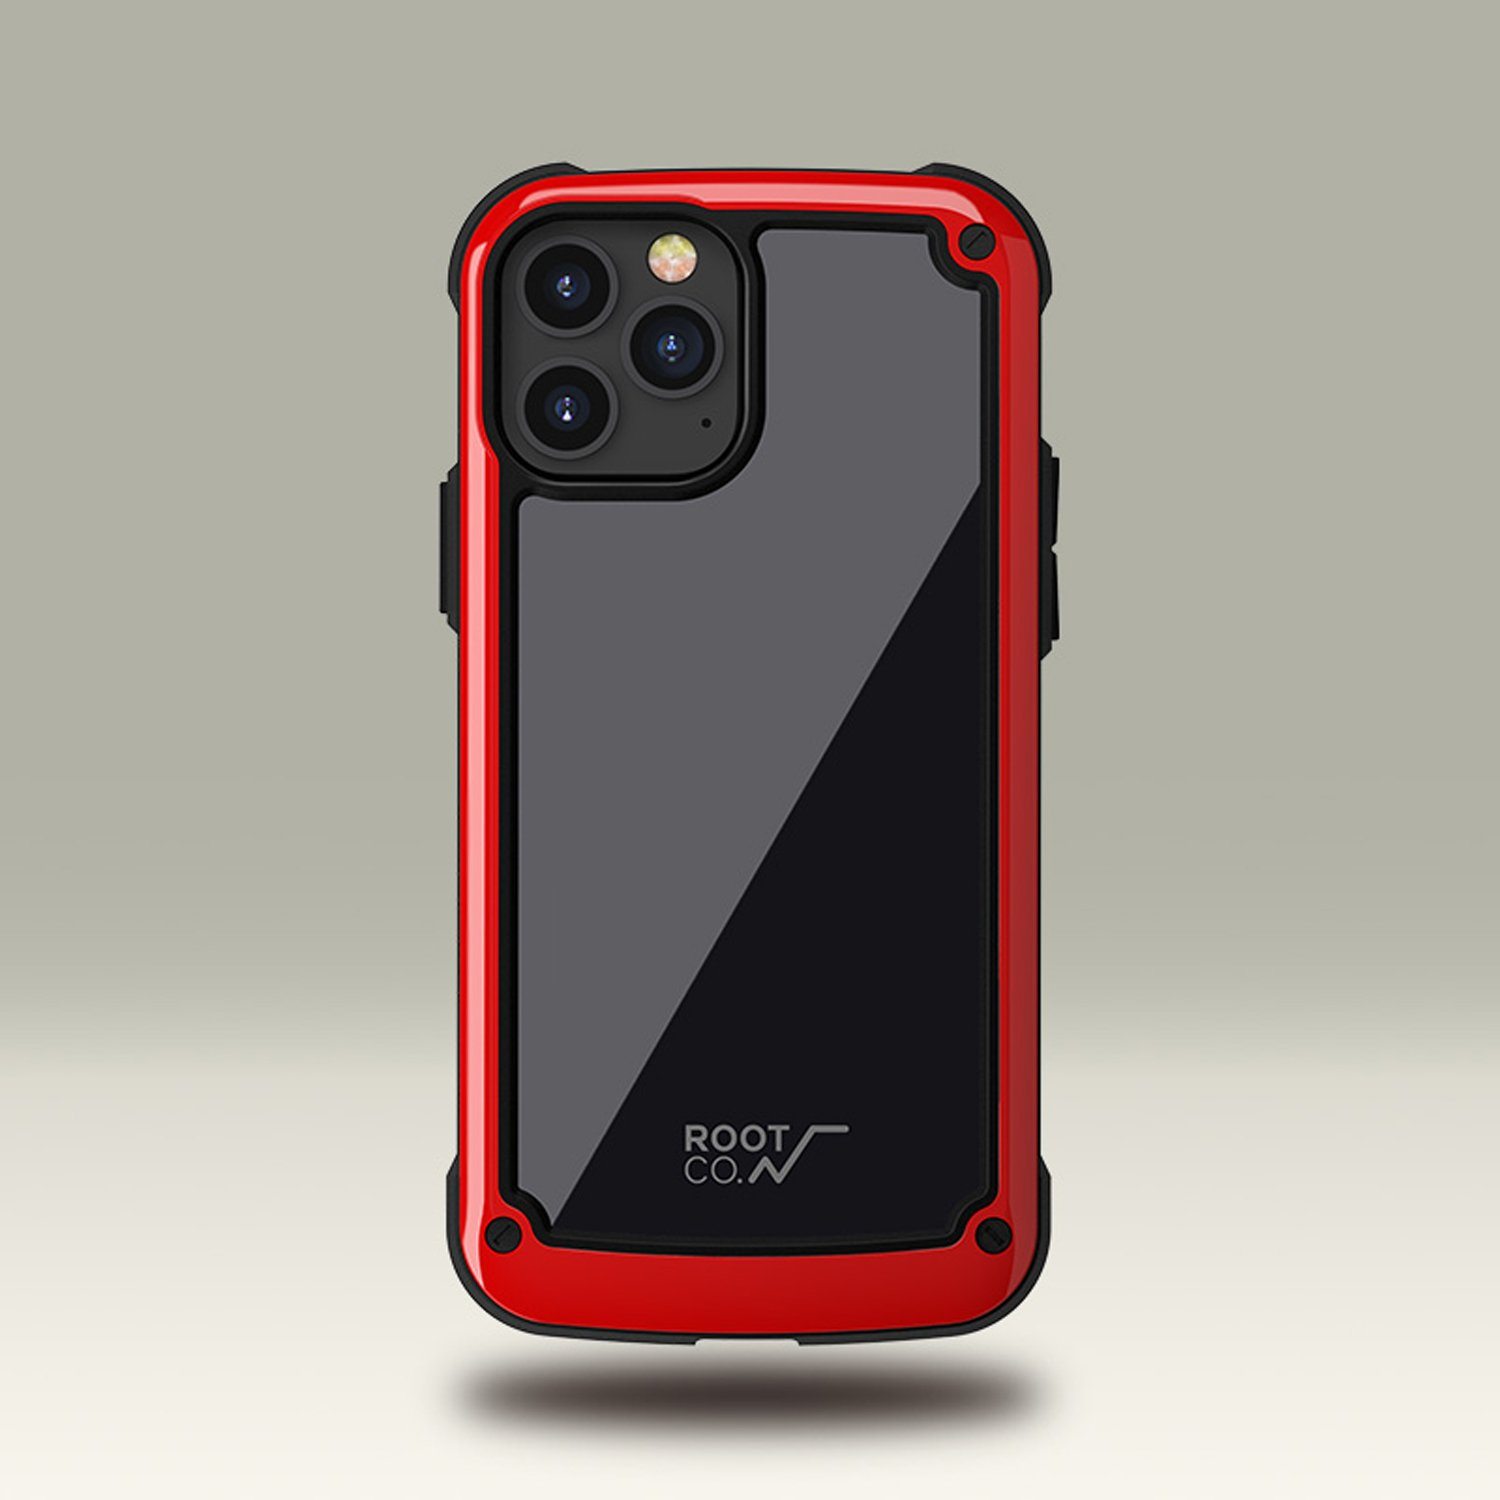 ROOT CO. Gravity Shock Resist Tough & Basic Case for iPhone 12/12 Pro 6.1"(2020), Red Default ROOT CO. 